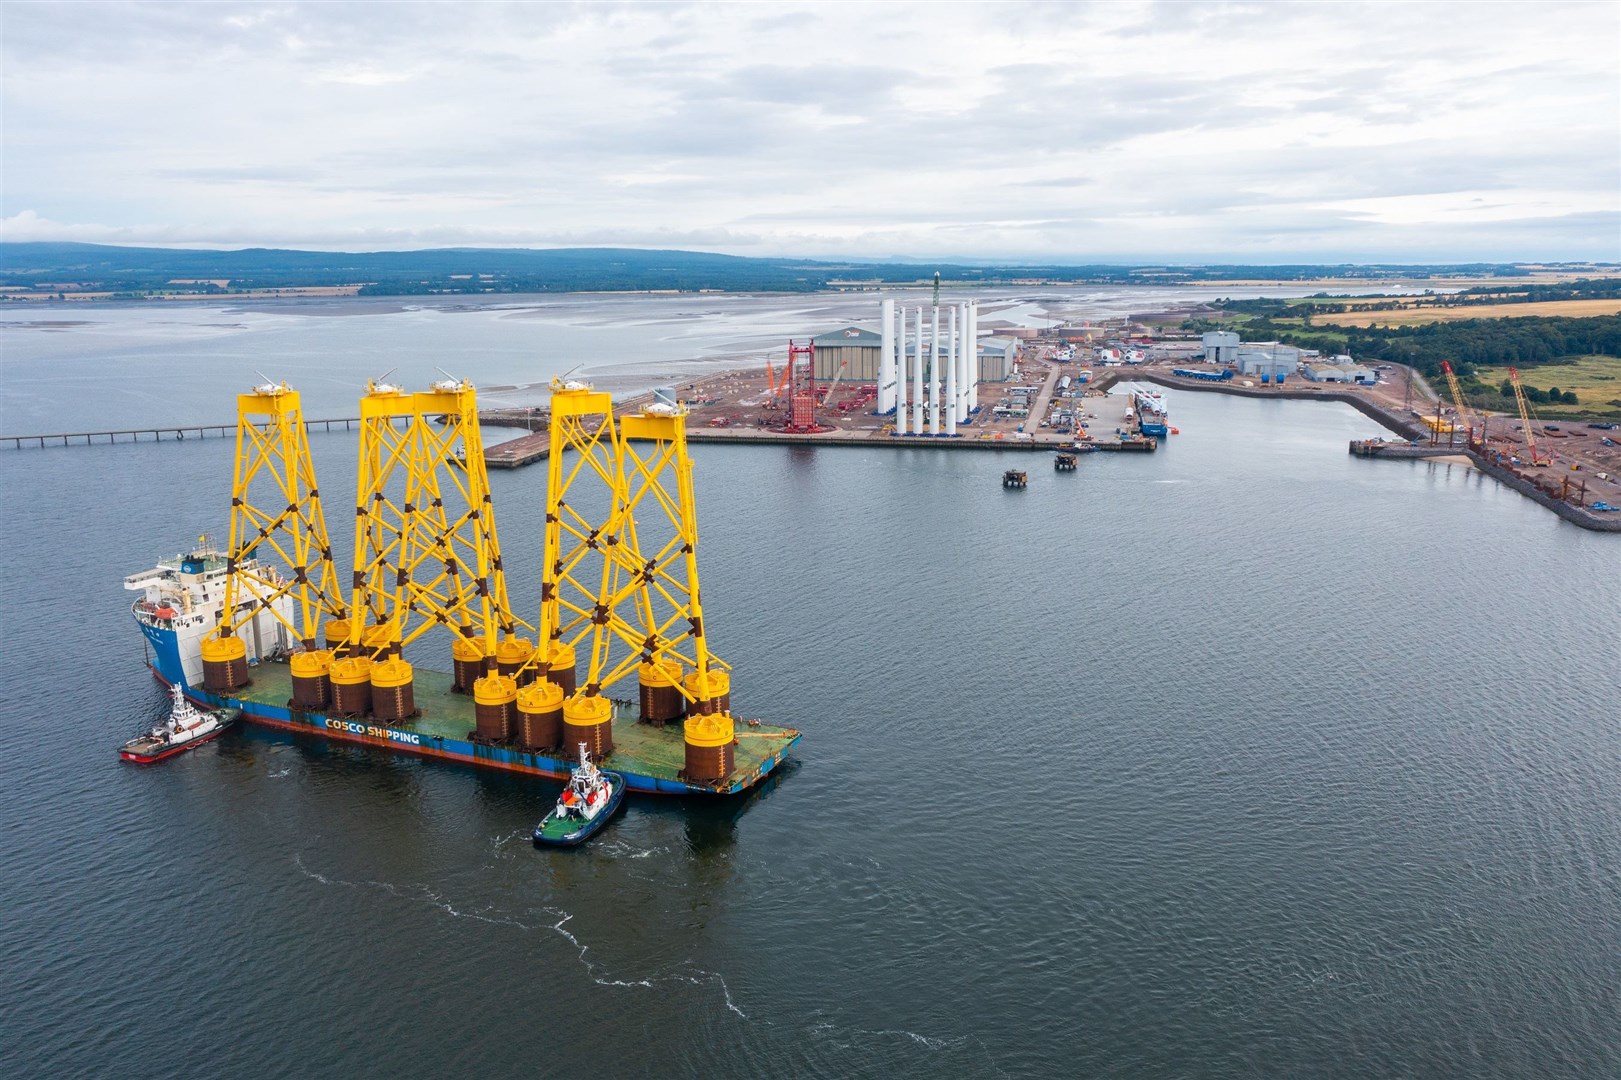 The delivery of Scotland’s largest offshore wind farm, the 1.1GW Seagreen, has taken another major step forward with the delivery of the first jacket superstructures to Port of Nigg in the Cromarty Firth. Picture credit: Seagreen Offshore Wind Farm